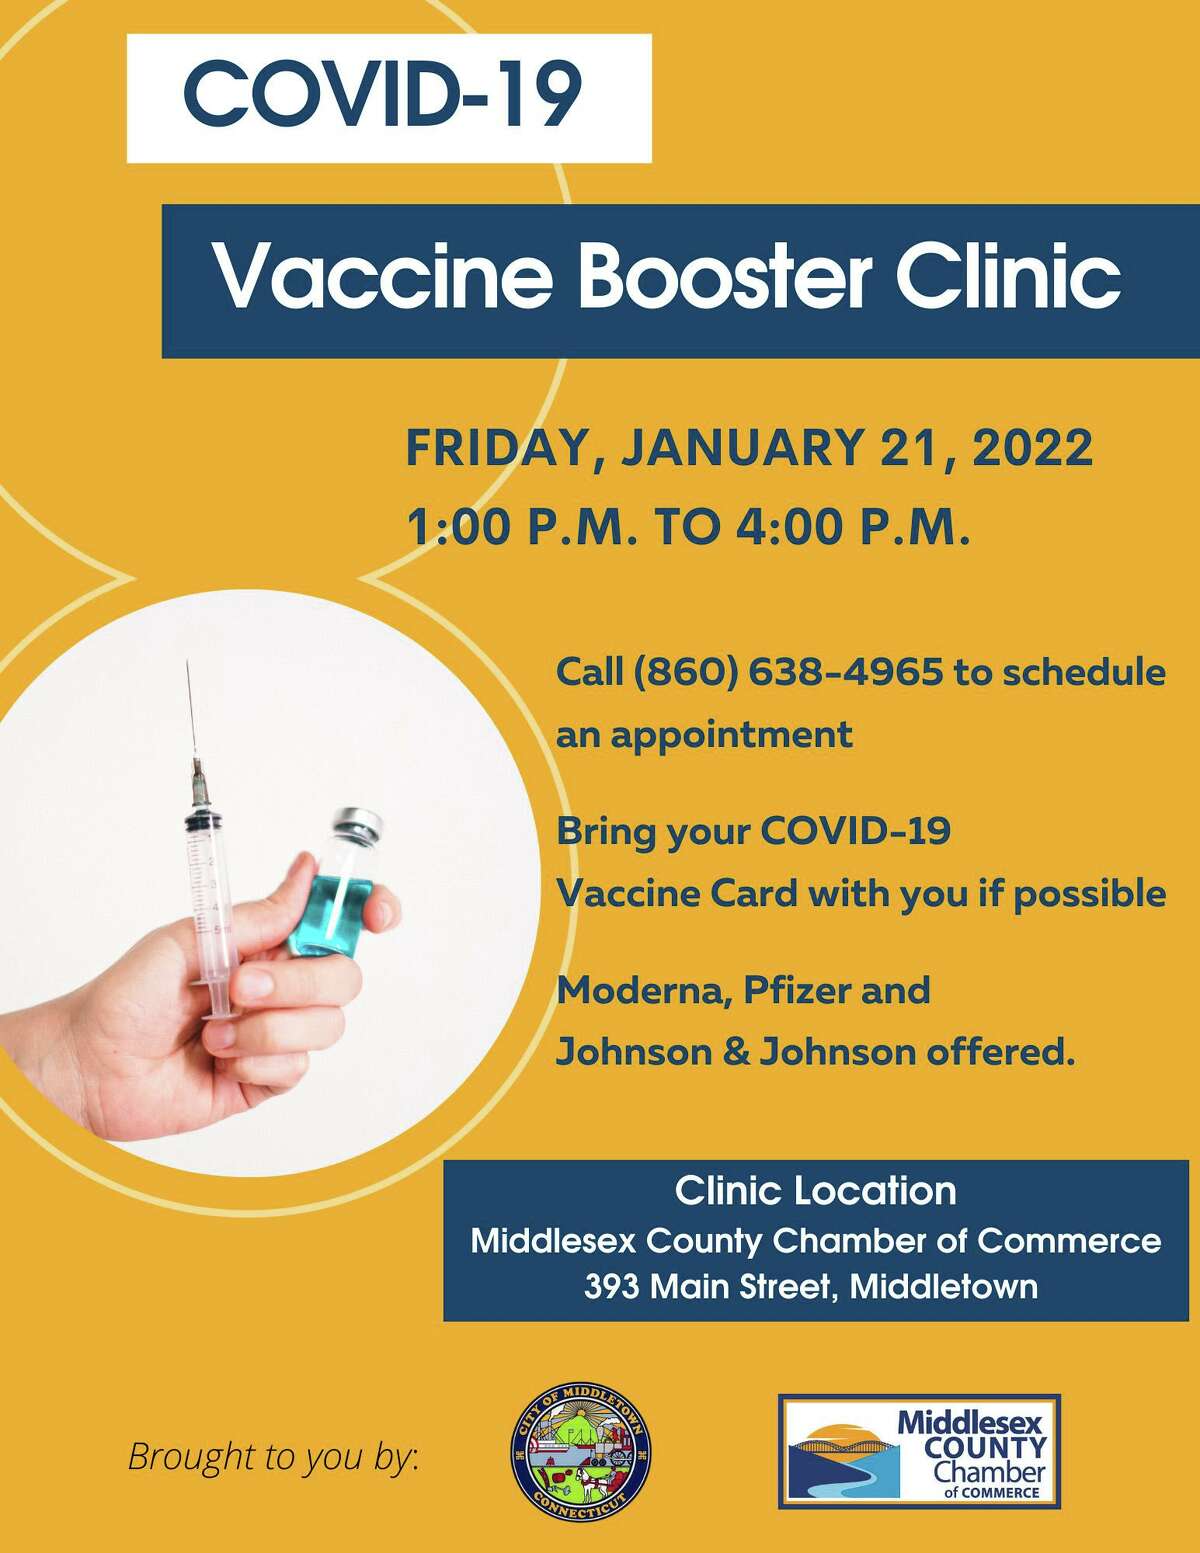 The Middlesex County Chamber of Commerce will be hosting a free COVID-19 booster clinic in collaboration with the city of Middletown Health Department.